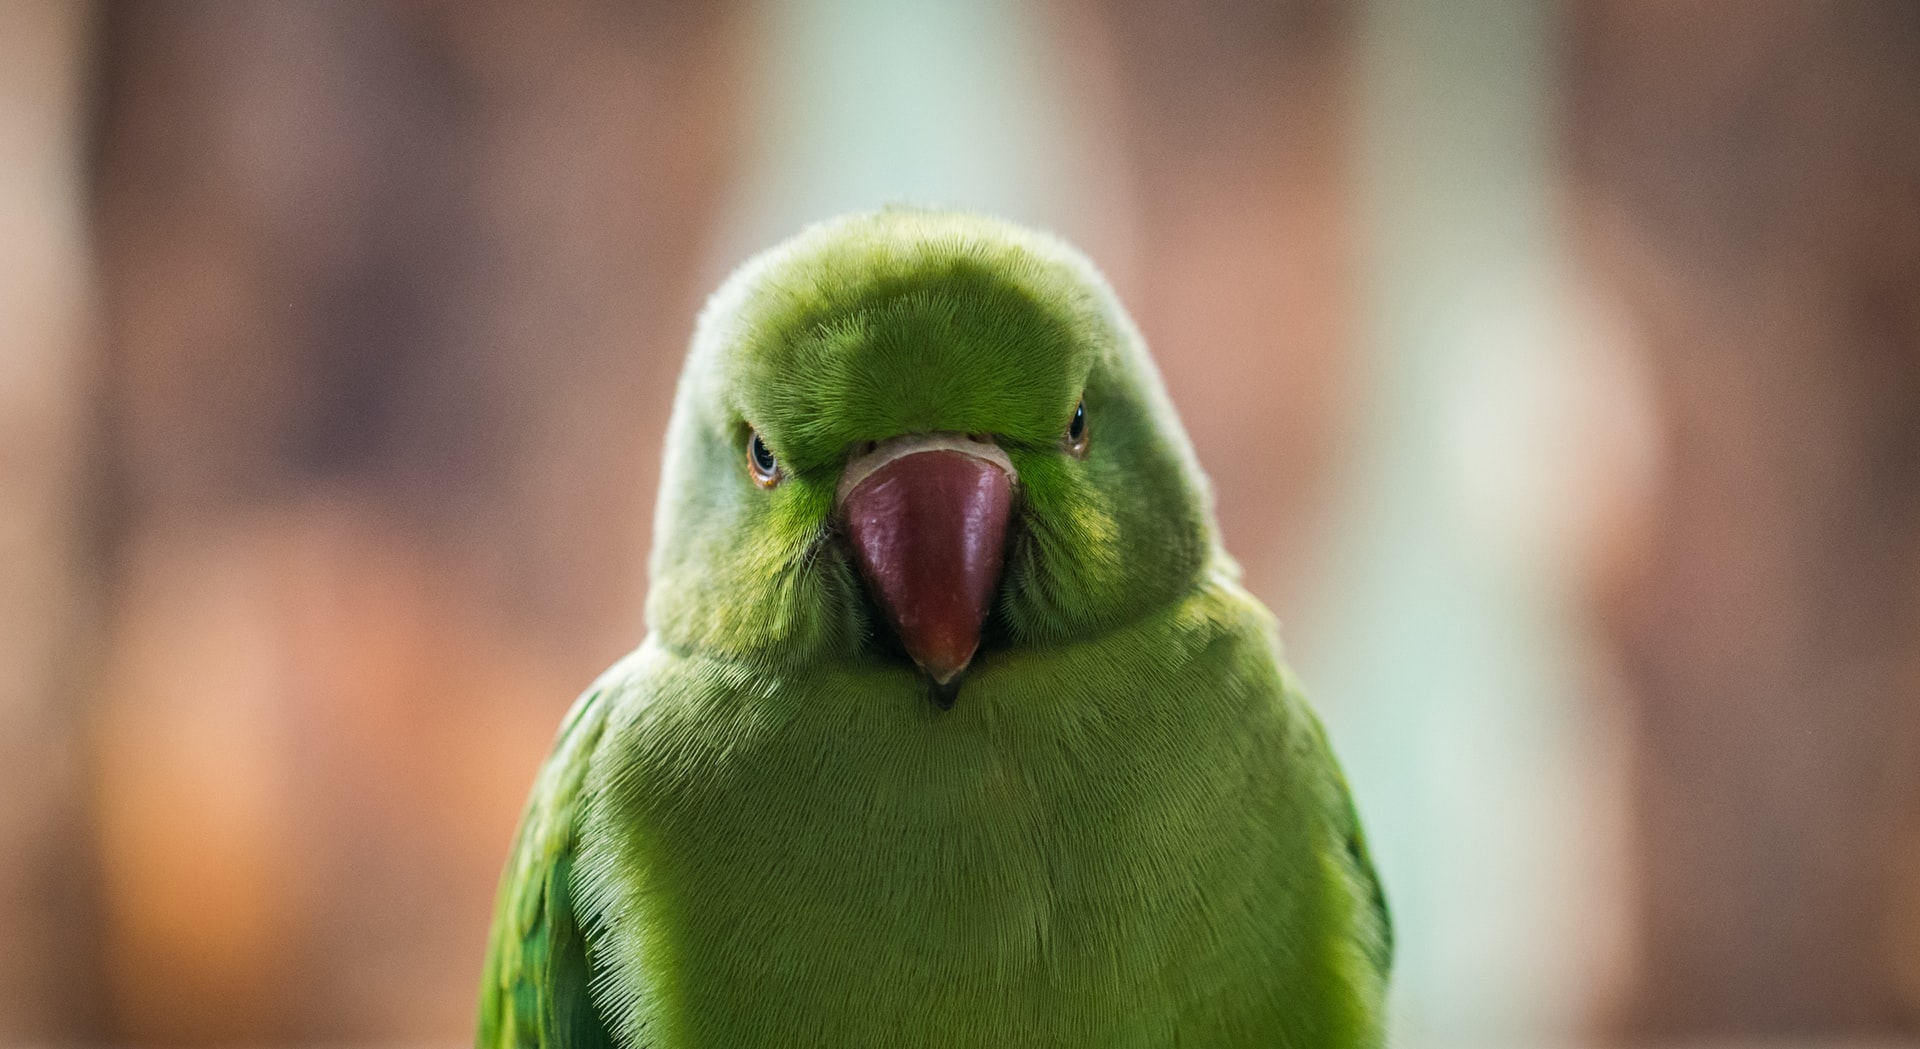 Angry budgie - Photo by Егор Камелев on Unsplash